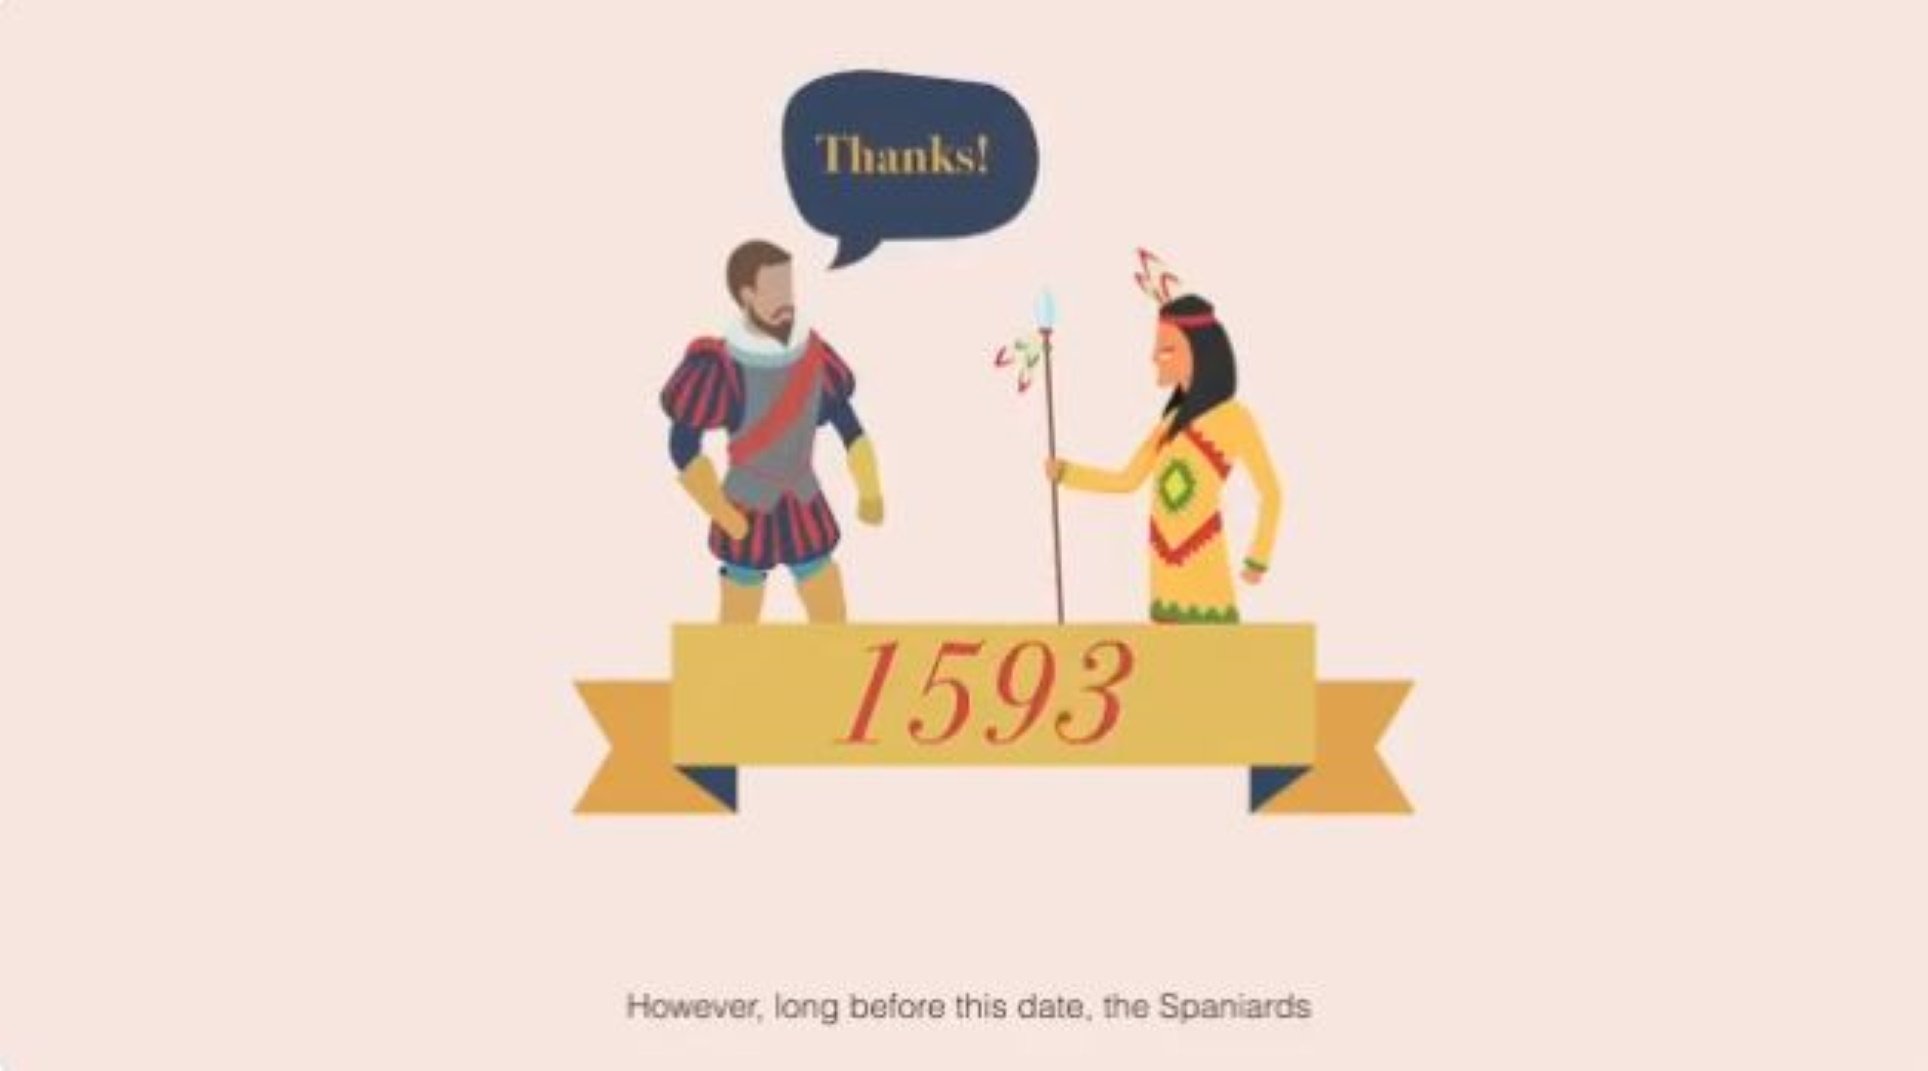 Global Spain offends Native Americans with Thanksgiving video (and misspells the holiday)